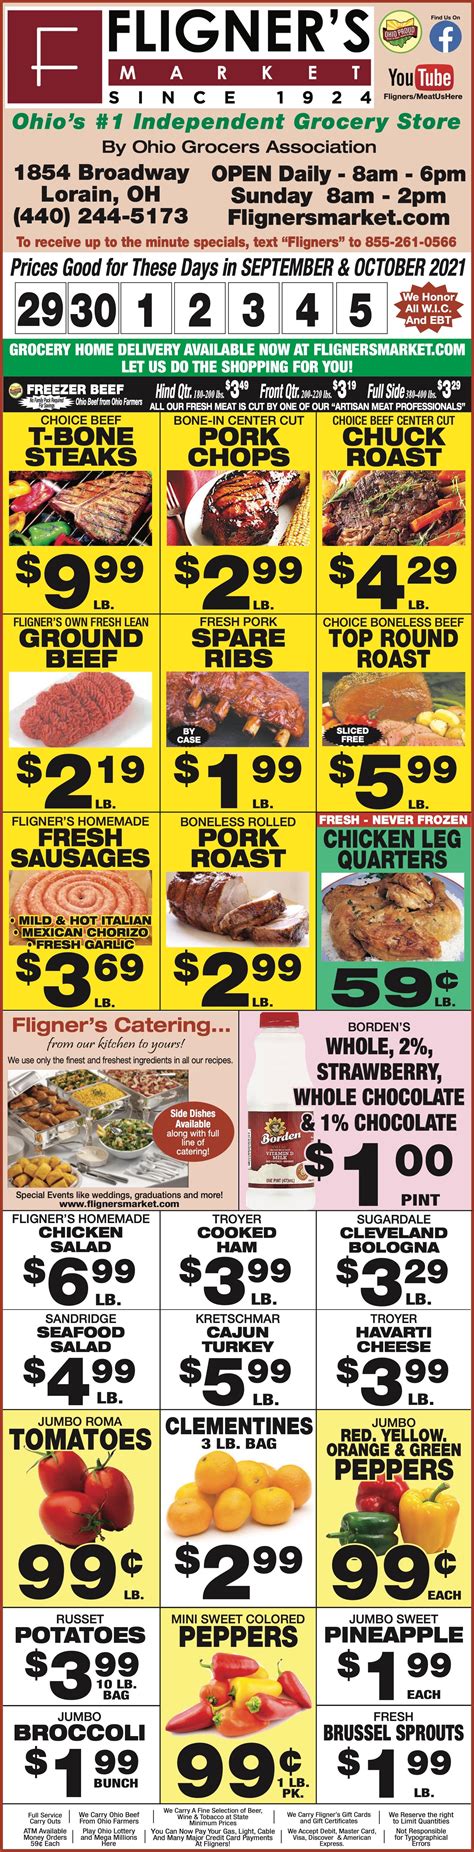 Contact information for aktienfakten.de - BAKERY PRODUCE DELI SEAFOOD SPECIALTY CATERING Order meat bundles online & pickup in store the next day! Get Started! READ OUR BLOG WEEKLY SPECIALS Sign up to receive coupons and specials directly to your email! 